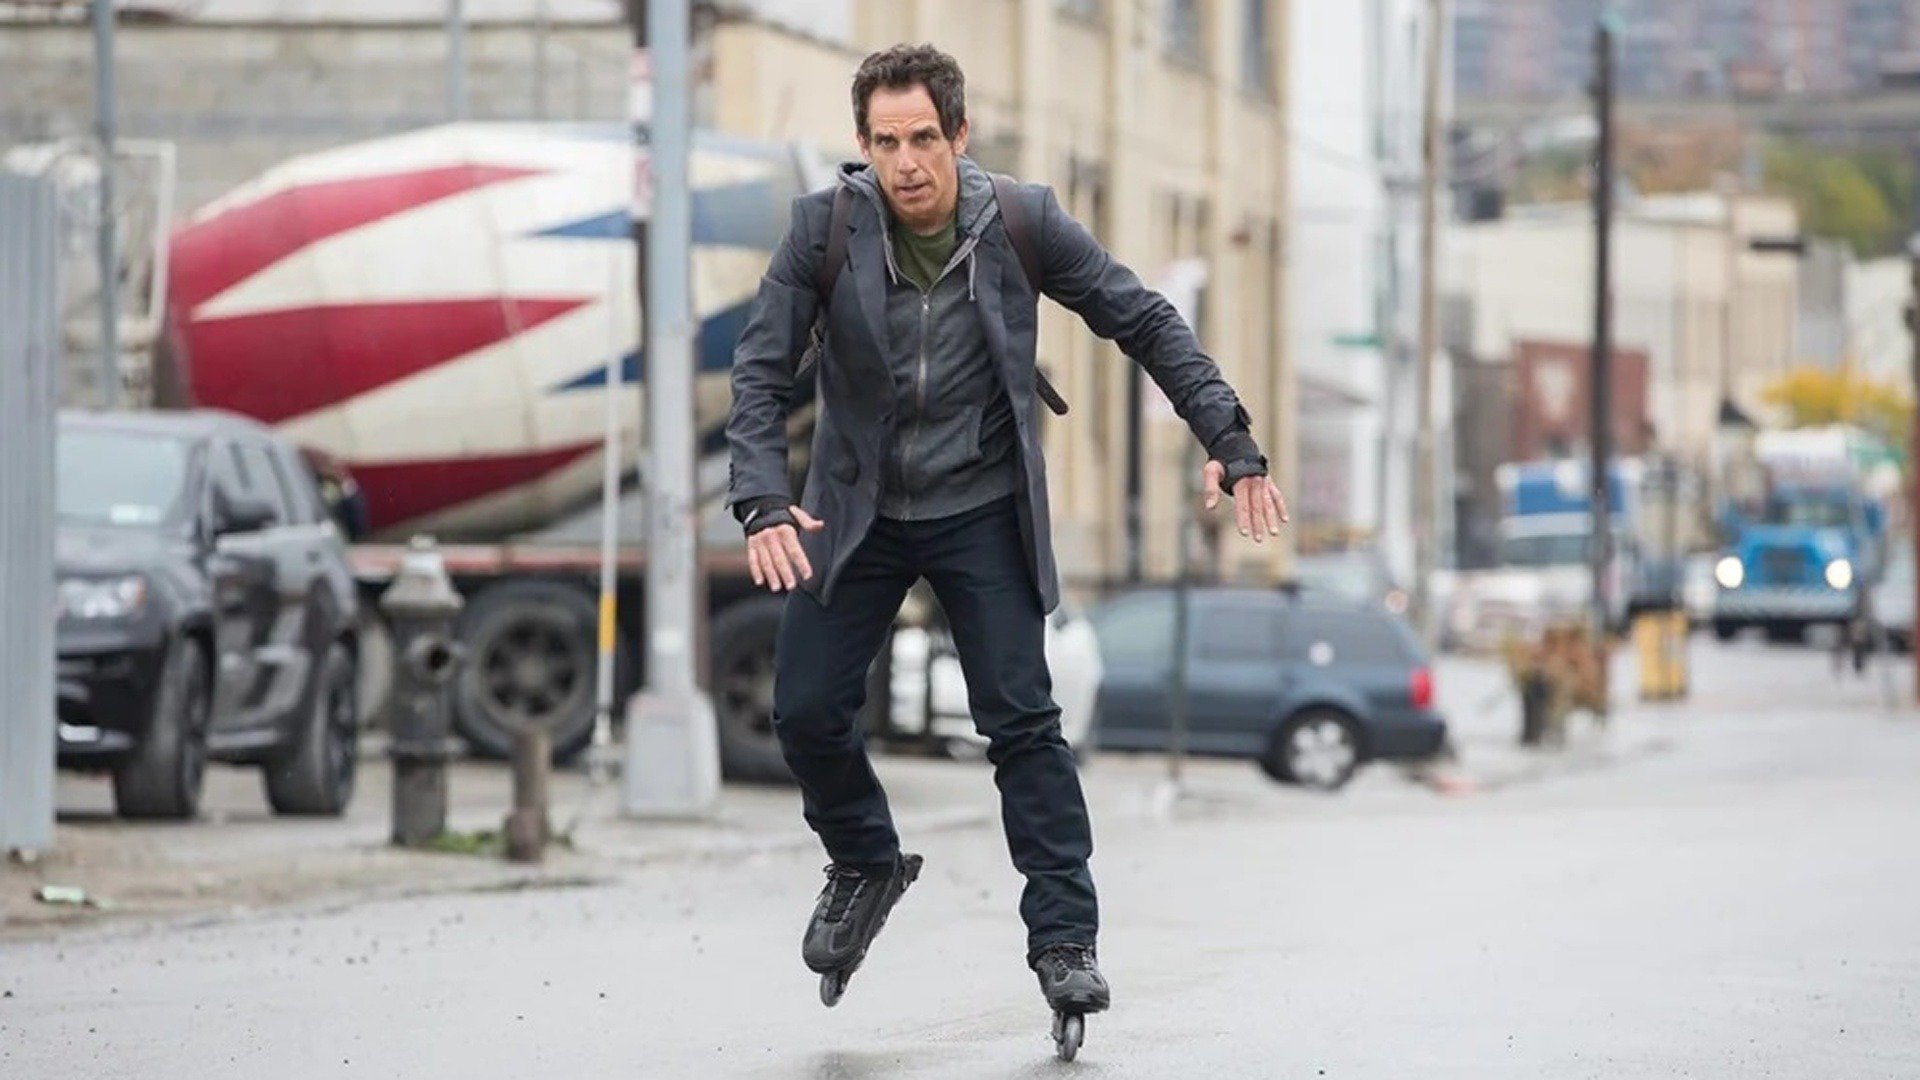 man on rollerblades in WHILE WE'RE YOUNG 